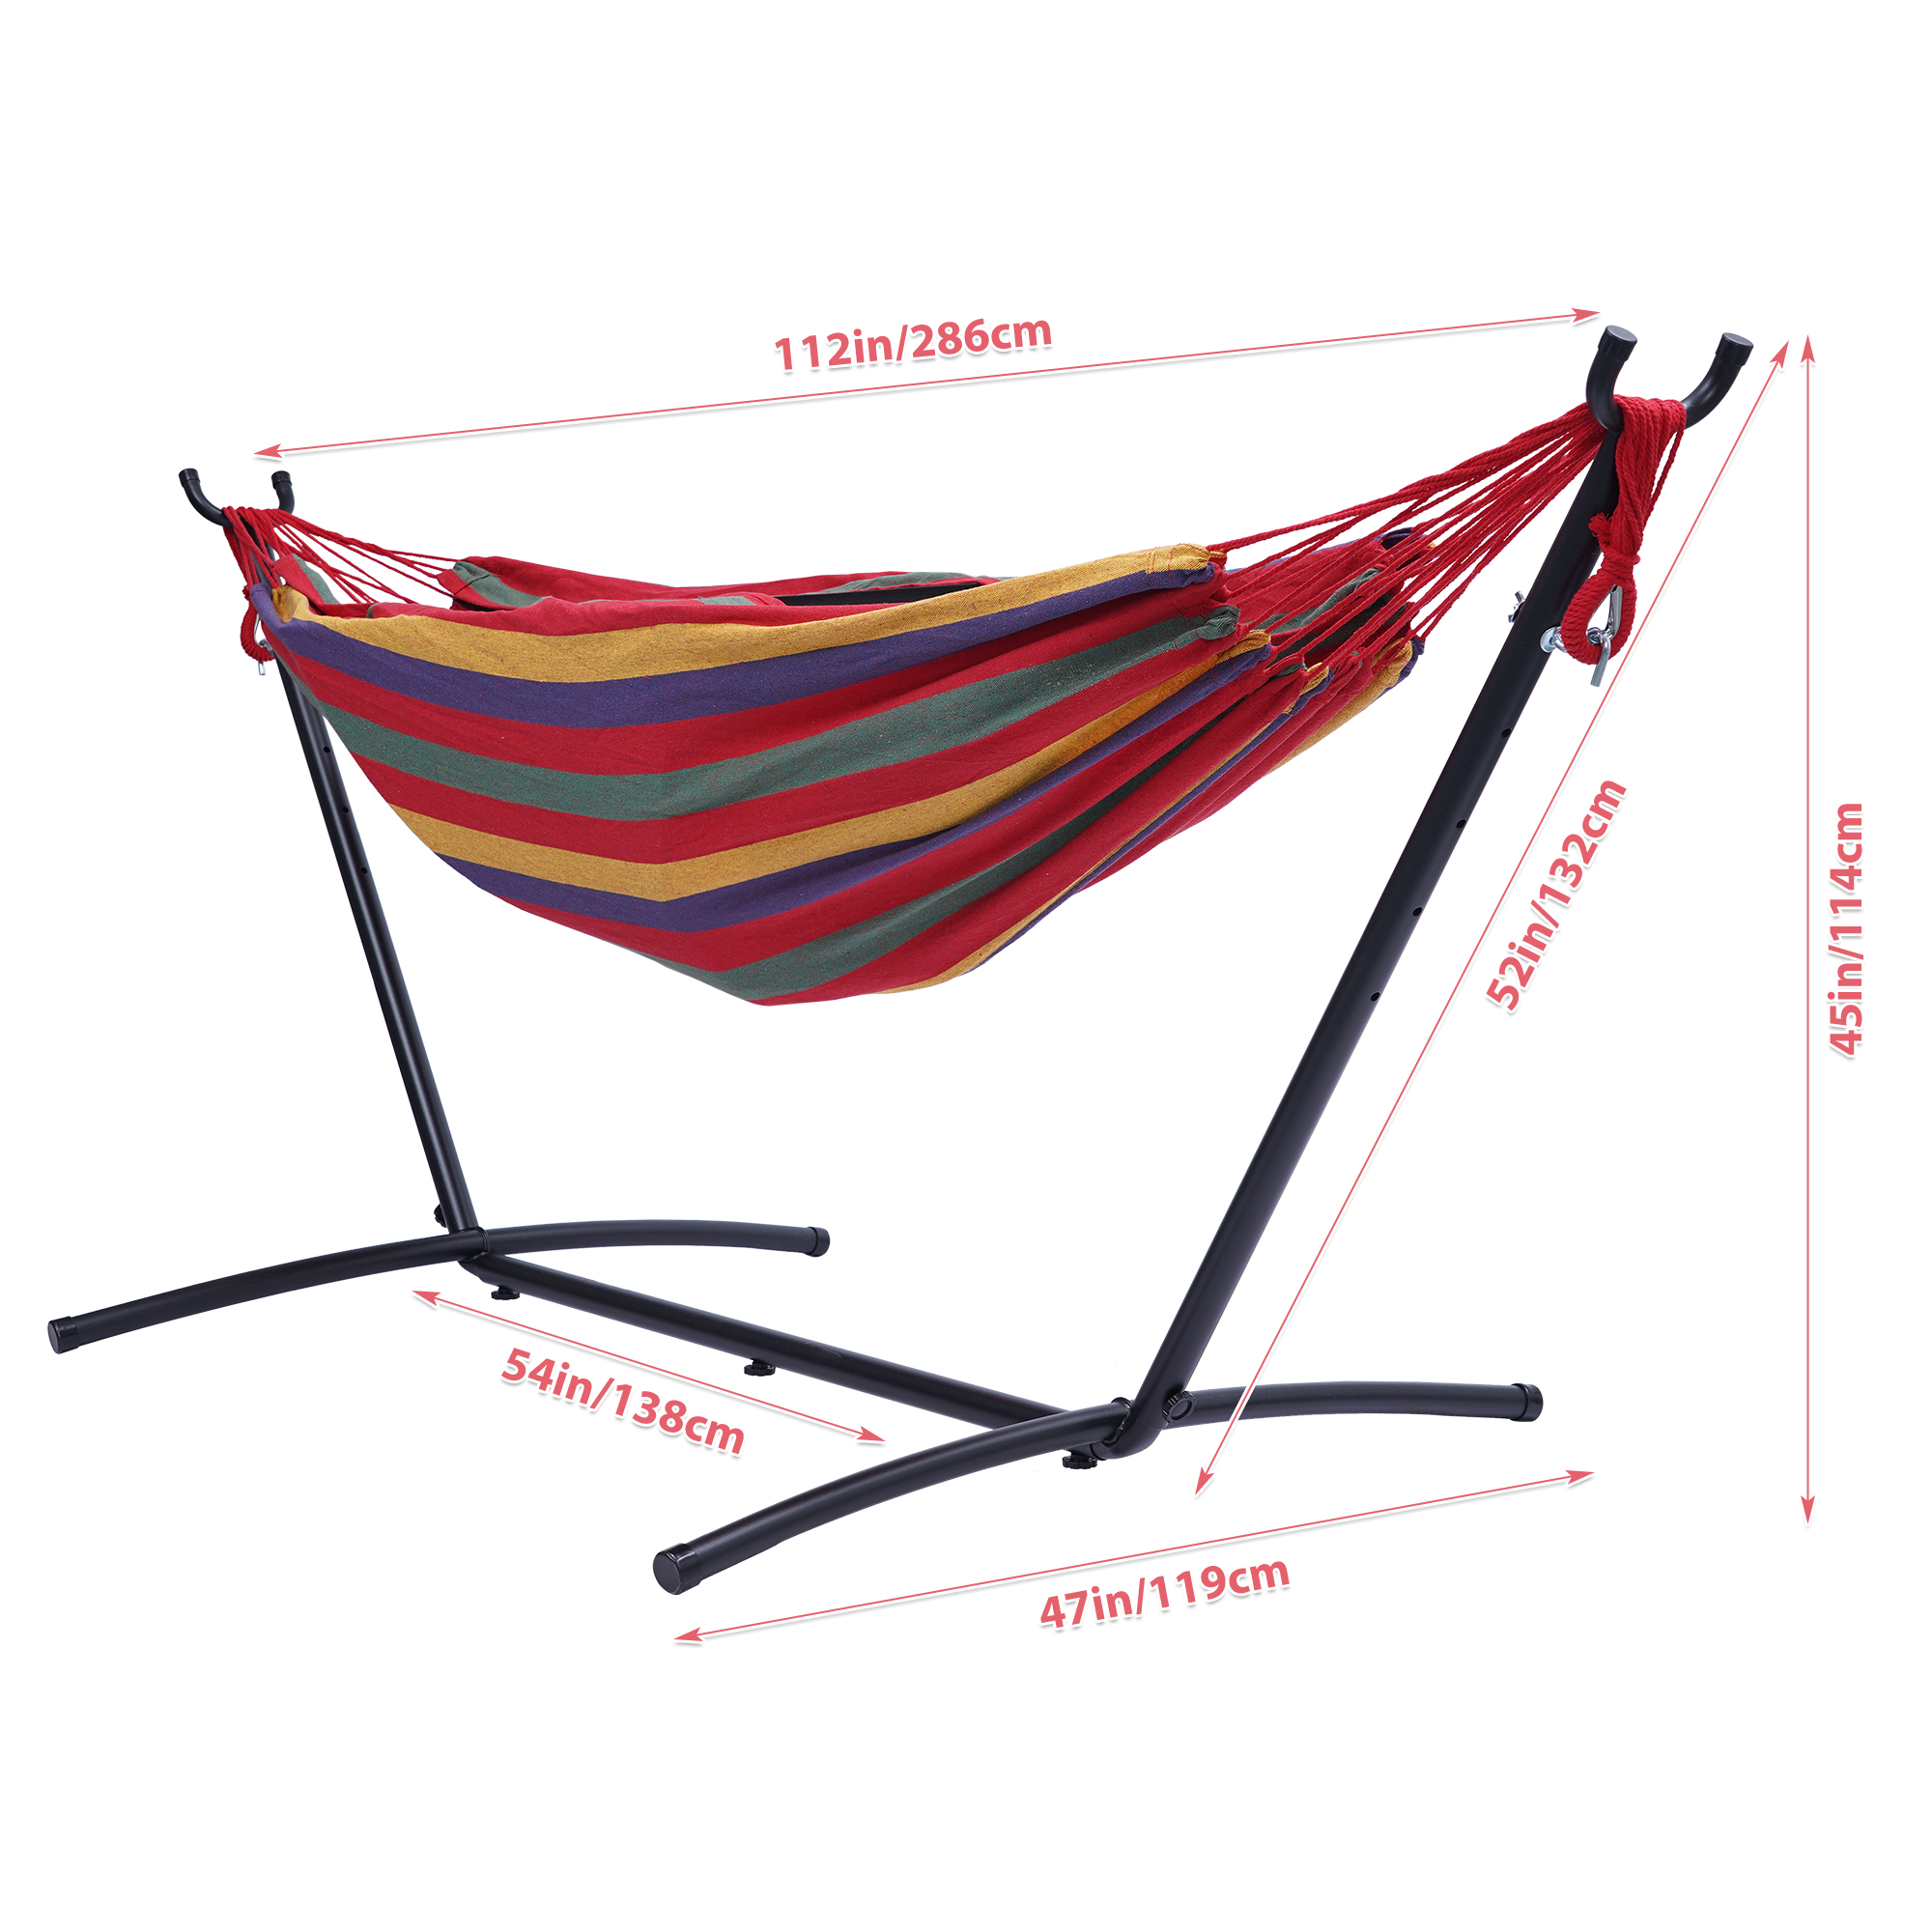 Clearance! Large Double Hammock Bed Set with Carrying Bag, Portable Hammock Chair Swing with Strong Steel Stand, Lightweight Hammocks for Backyard, Porch, Garden, Outdoor and Indoor Use, K3964 - image 4 of 8